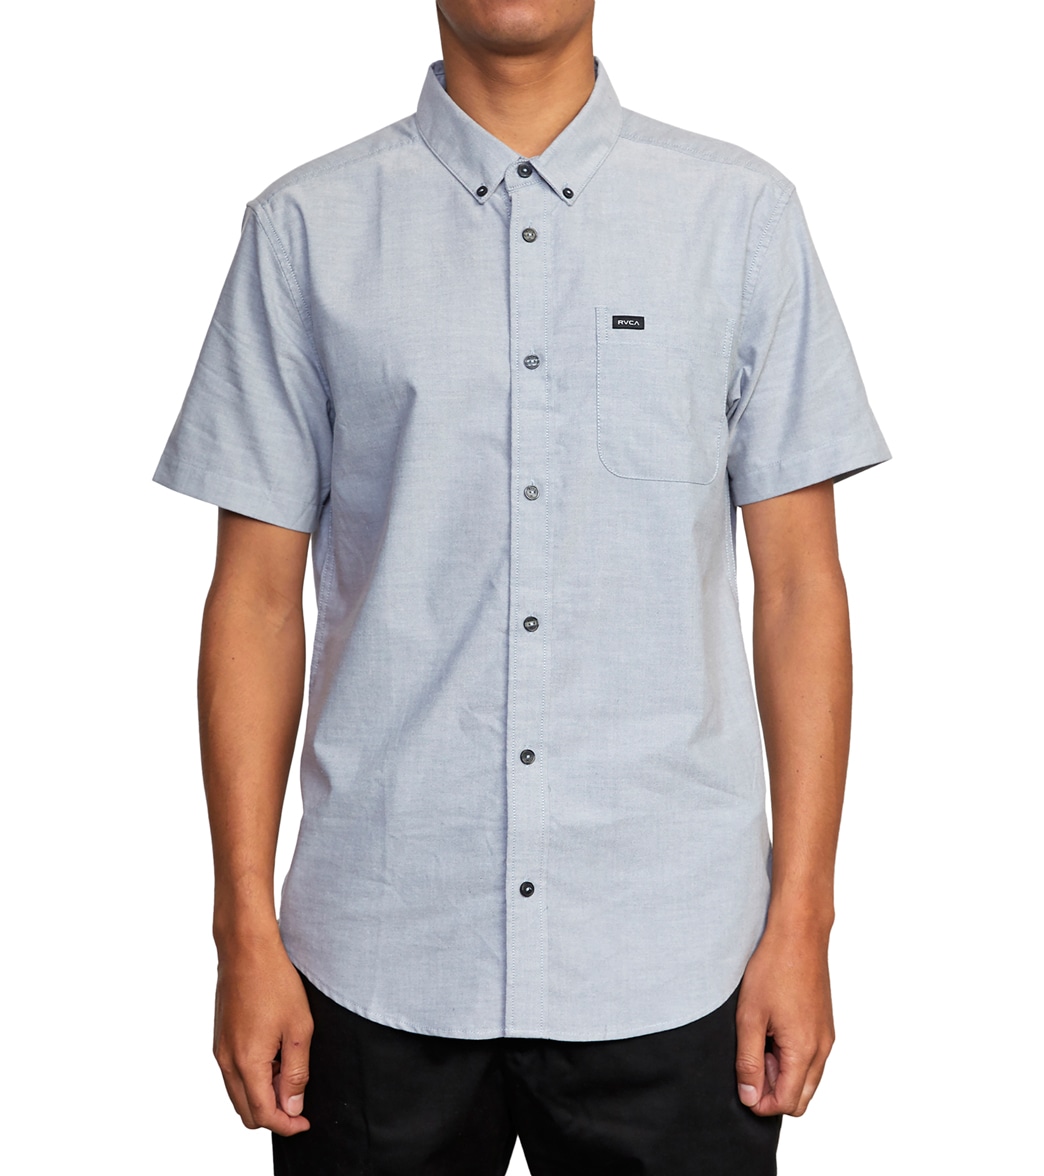 Rvca That'll Do Oxford Stretch Short Sleeve Shirt - Pavement Small Cotton/Polyester - Swimoutlet.com